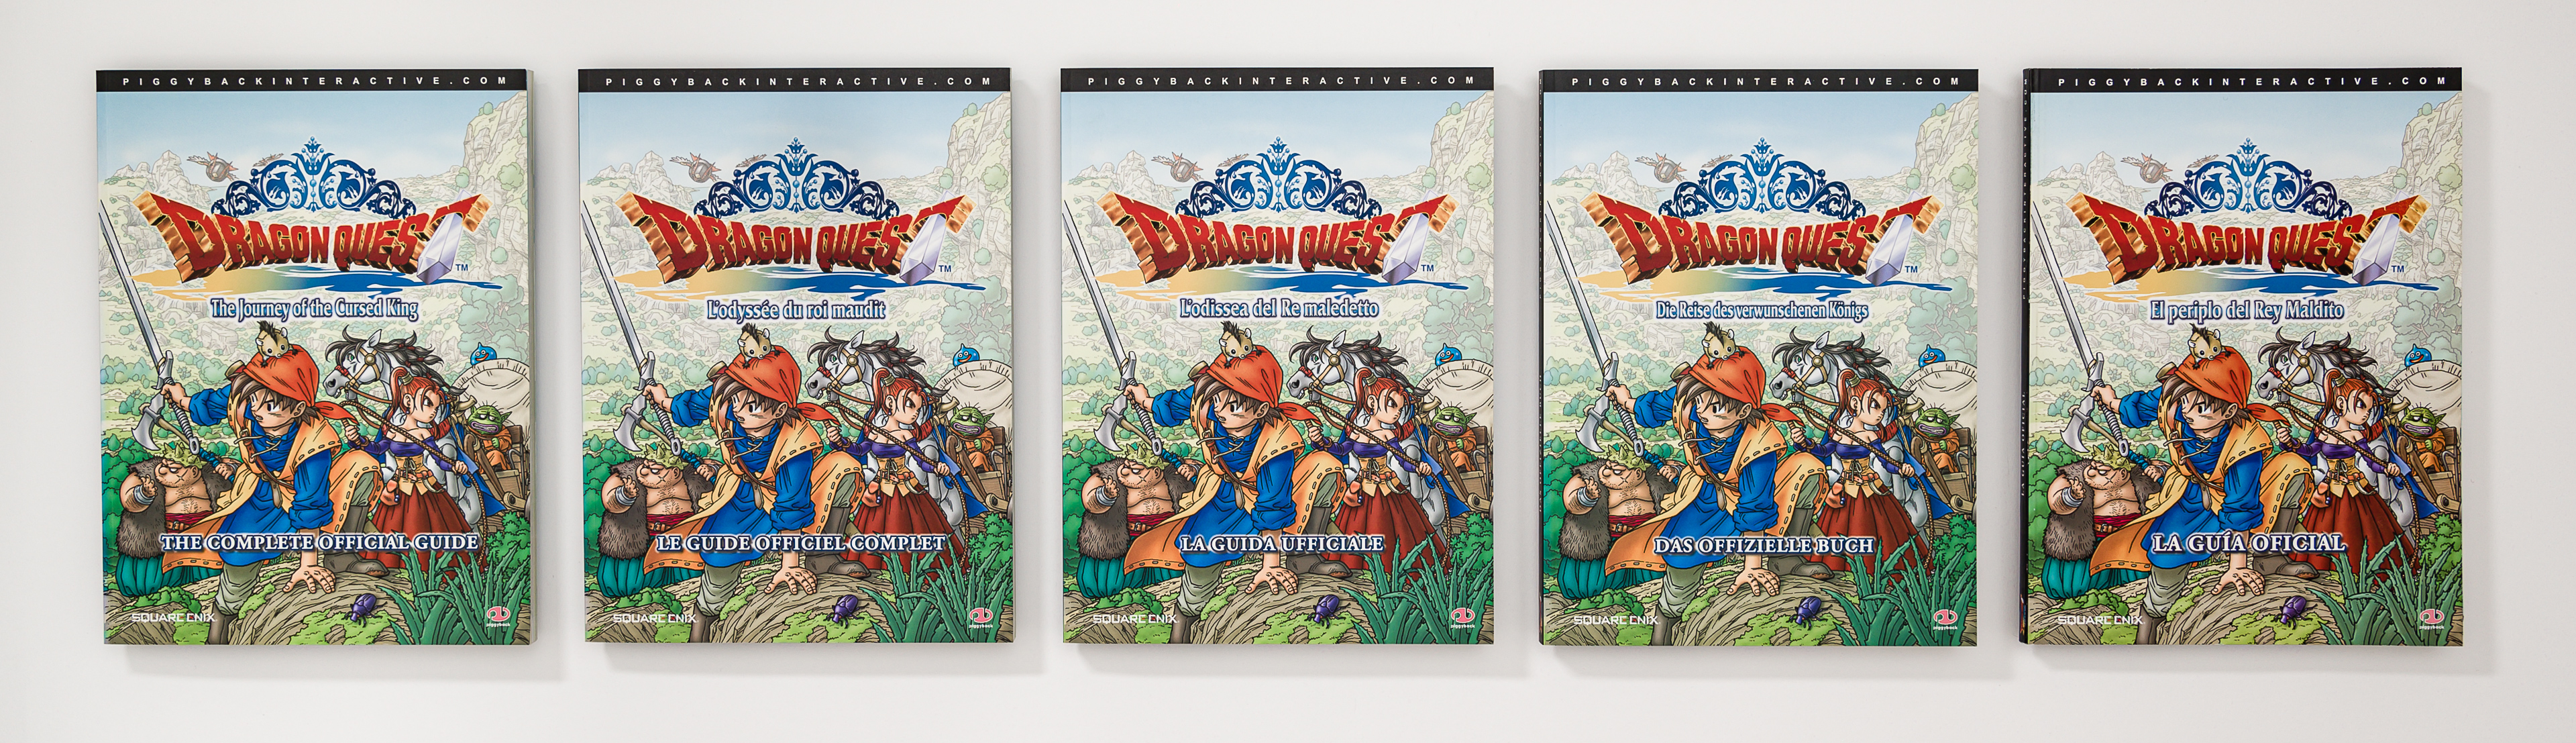 Dragon Quest 8: Journey of the Cursed King looks rather lovely on